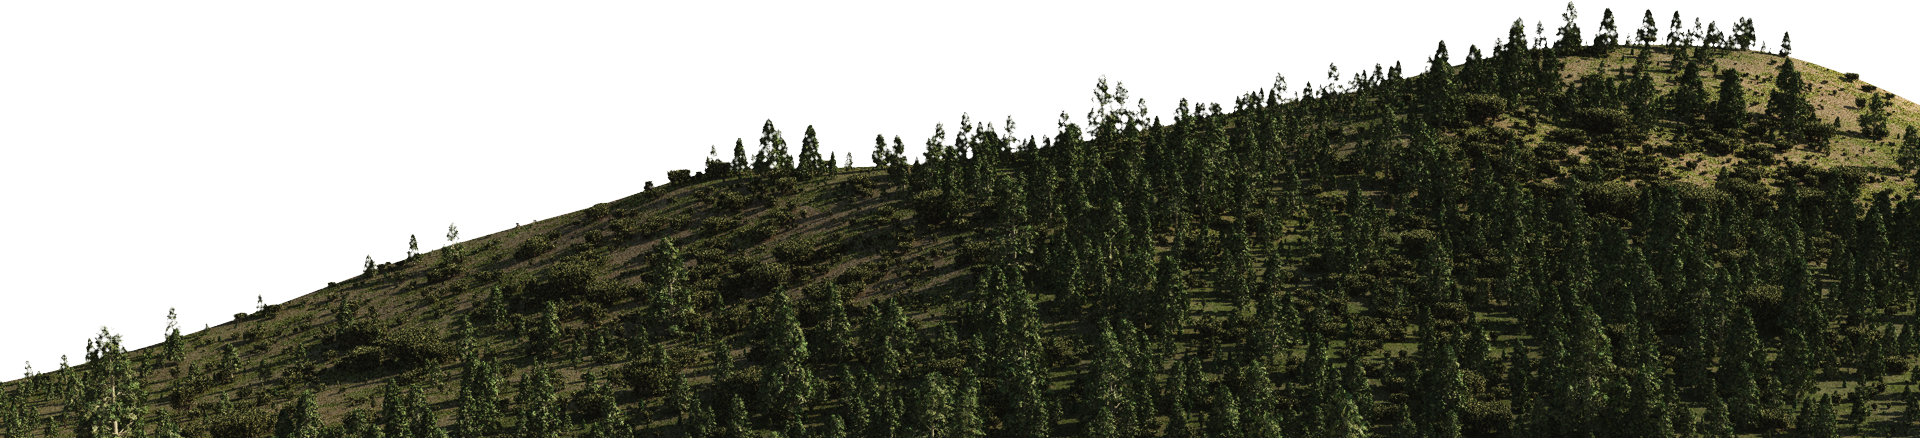 clipart forest mountains